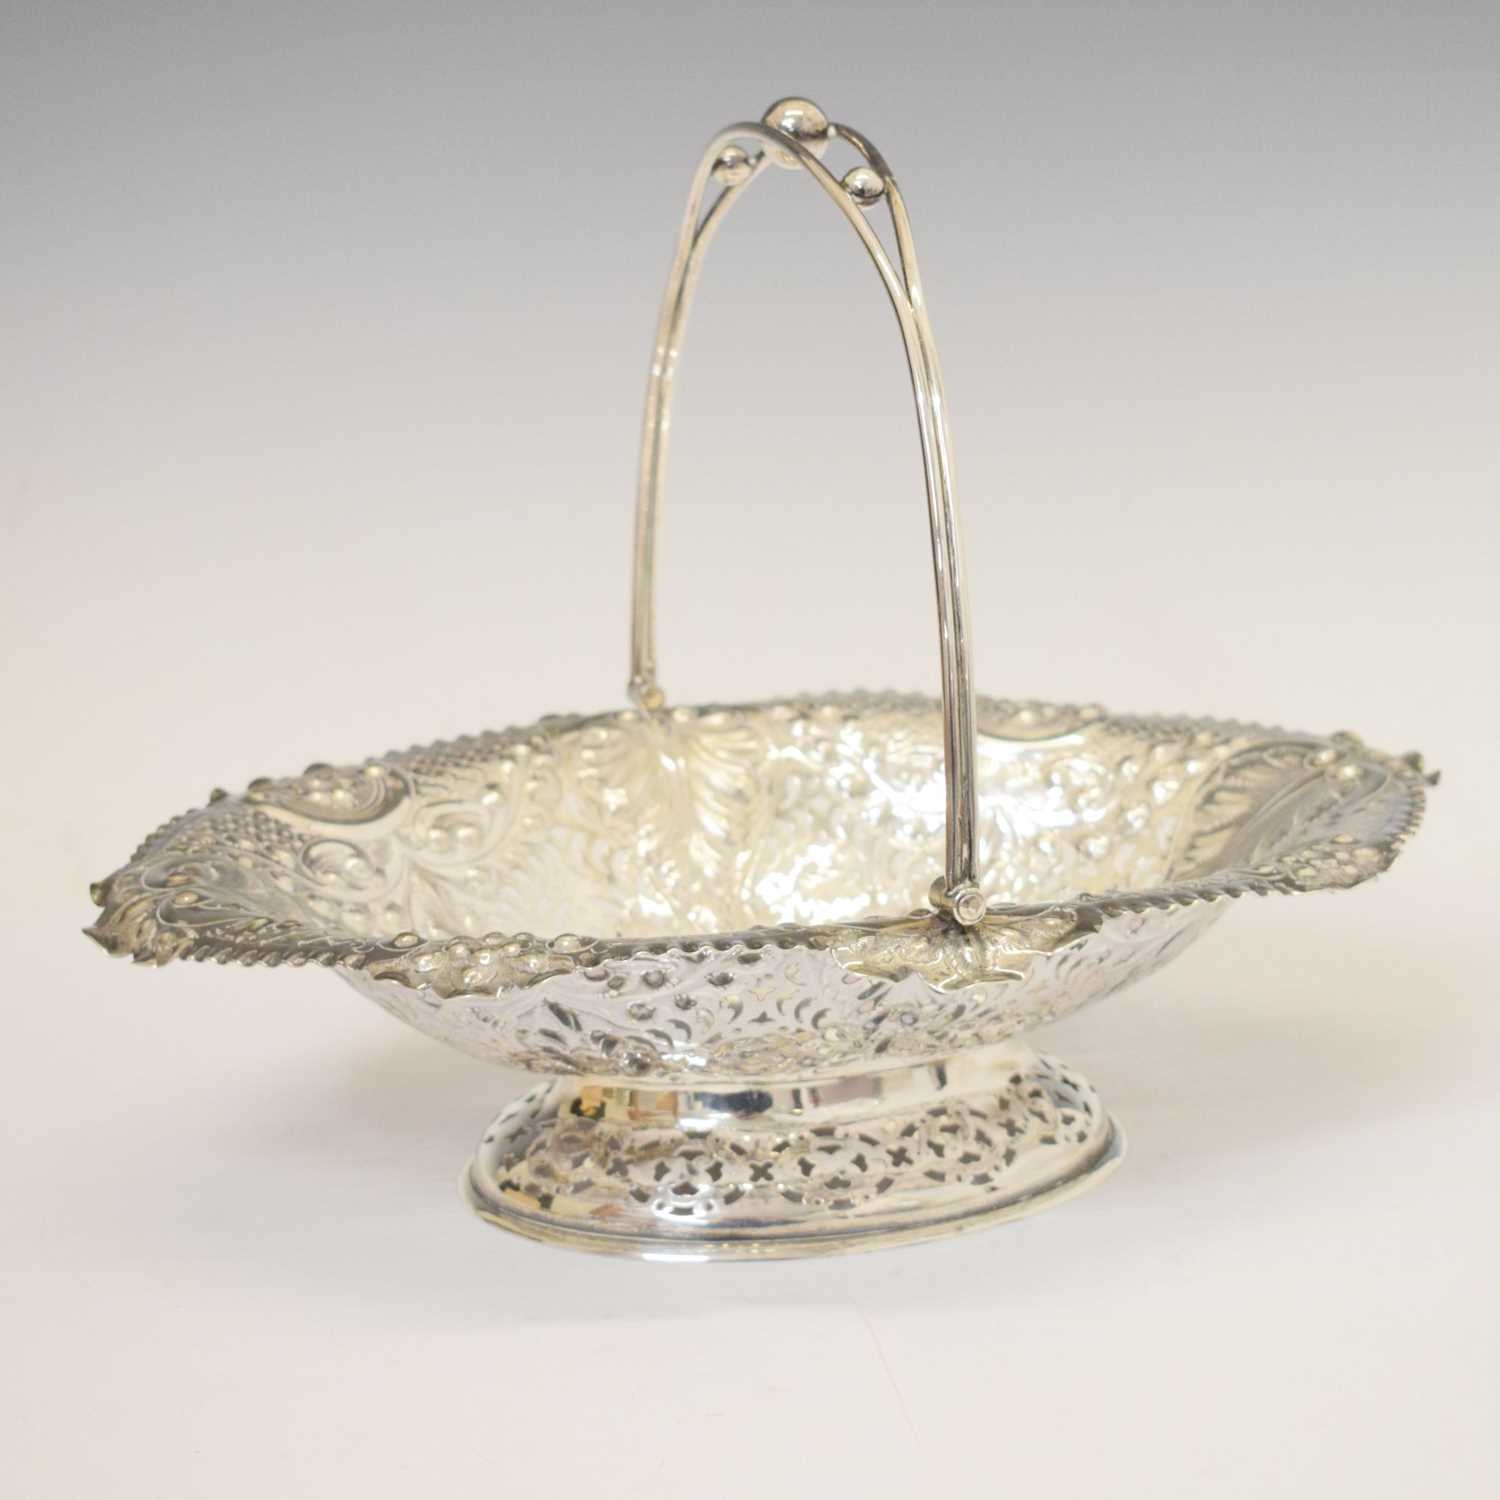 Late Victorian silver basket